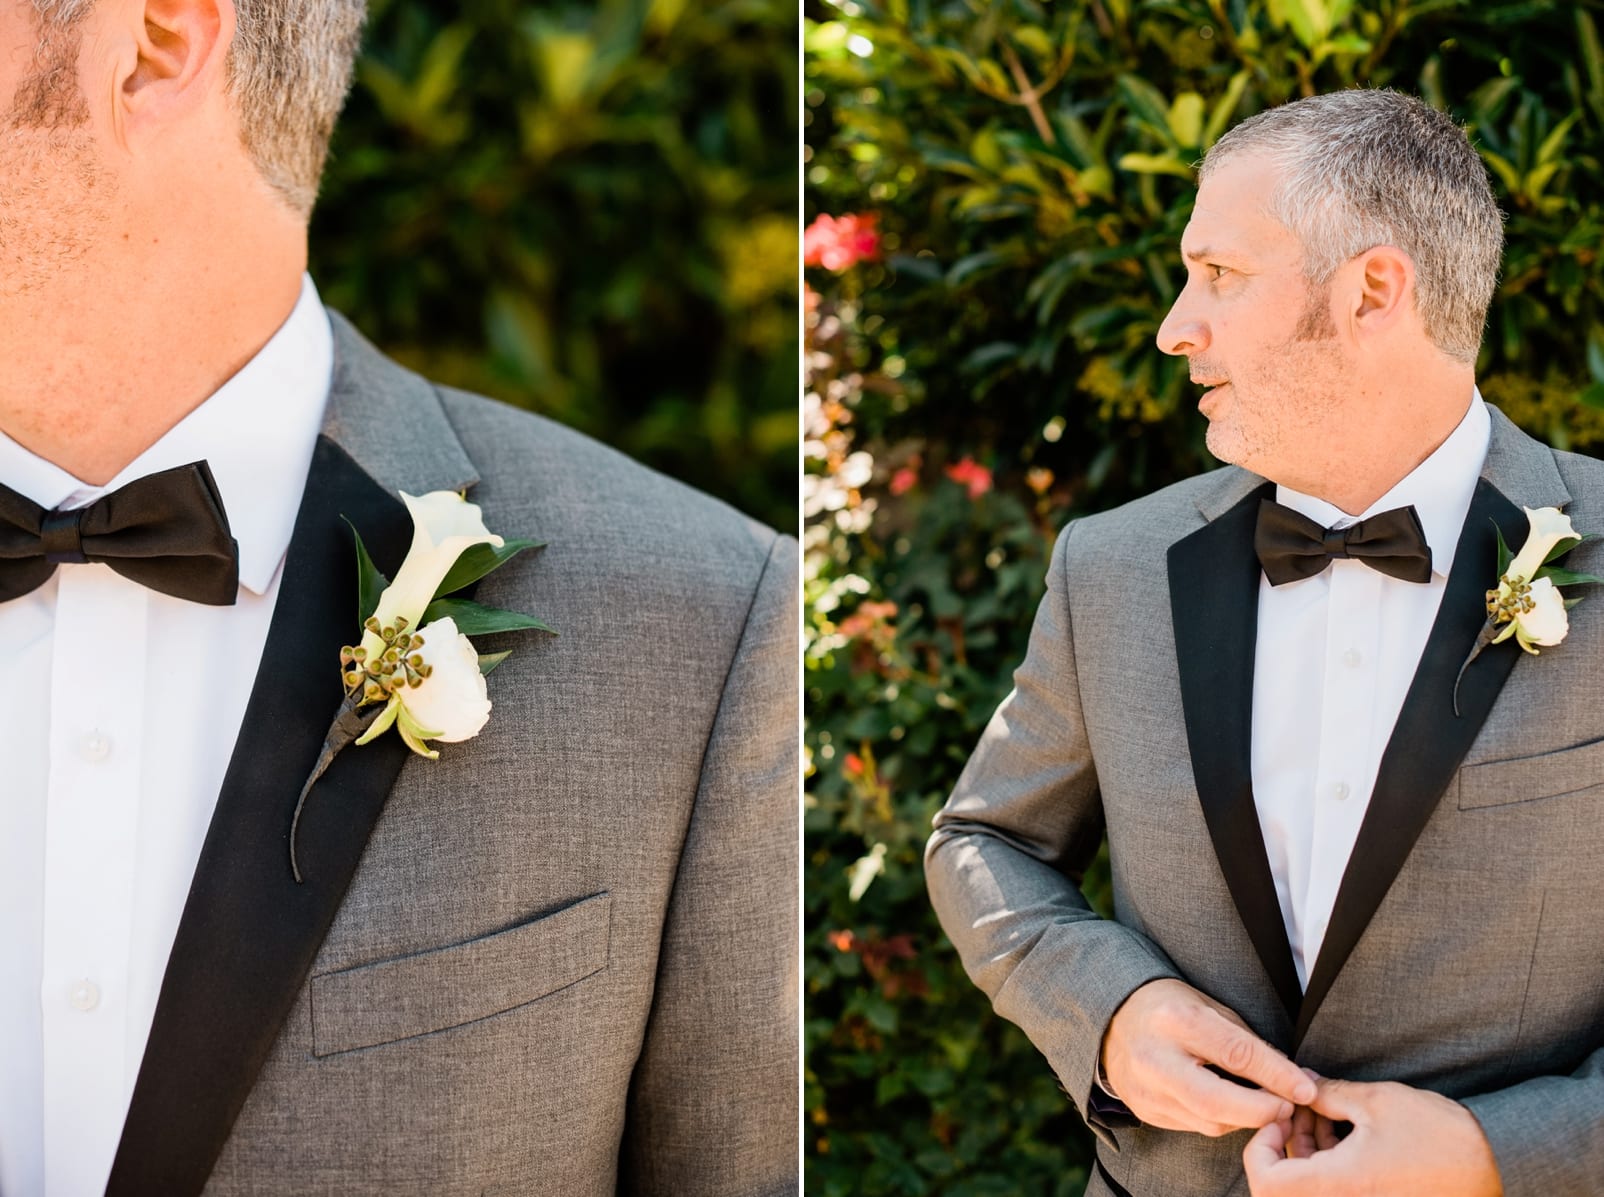 Kelly Odom Flowers boutonniere with a white flower and close up of the groom buttoning his jacket photo